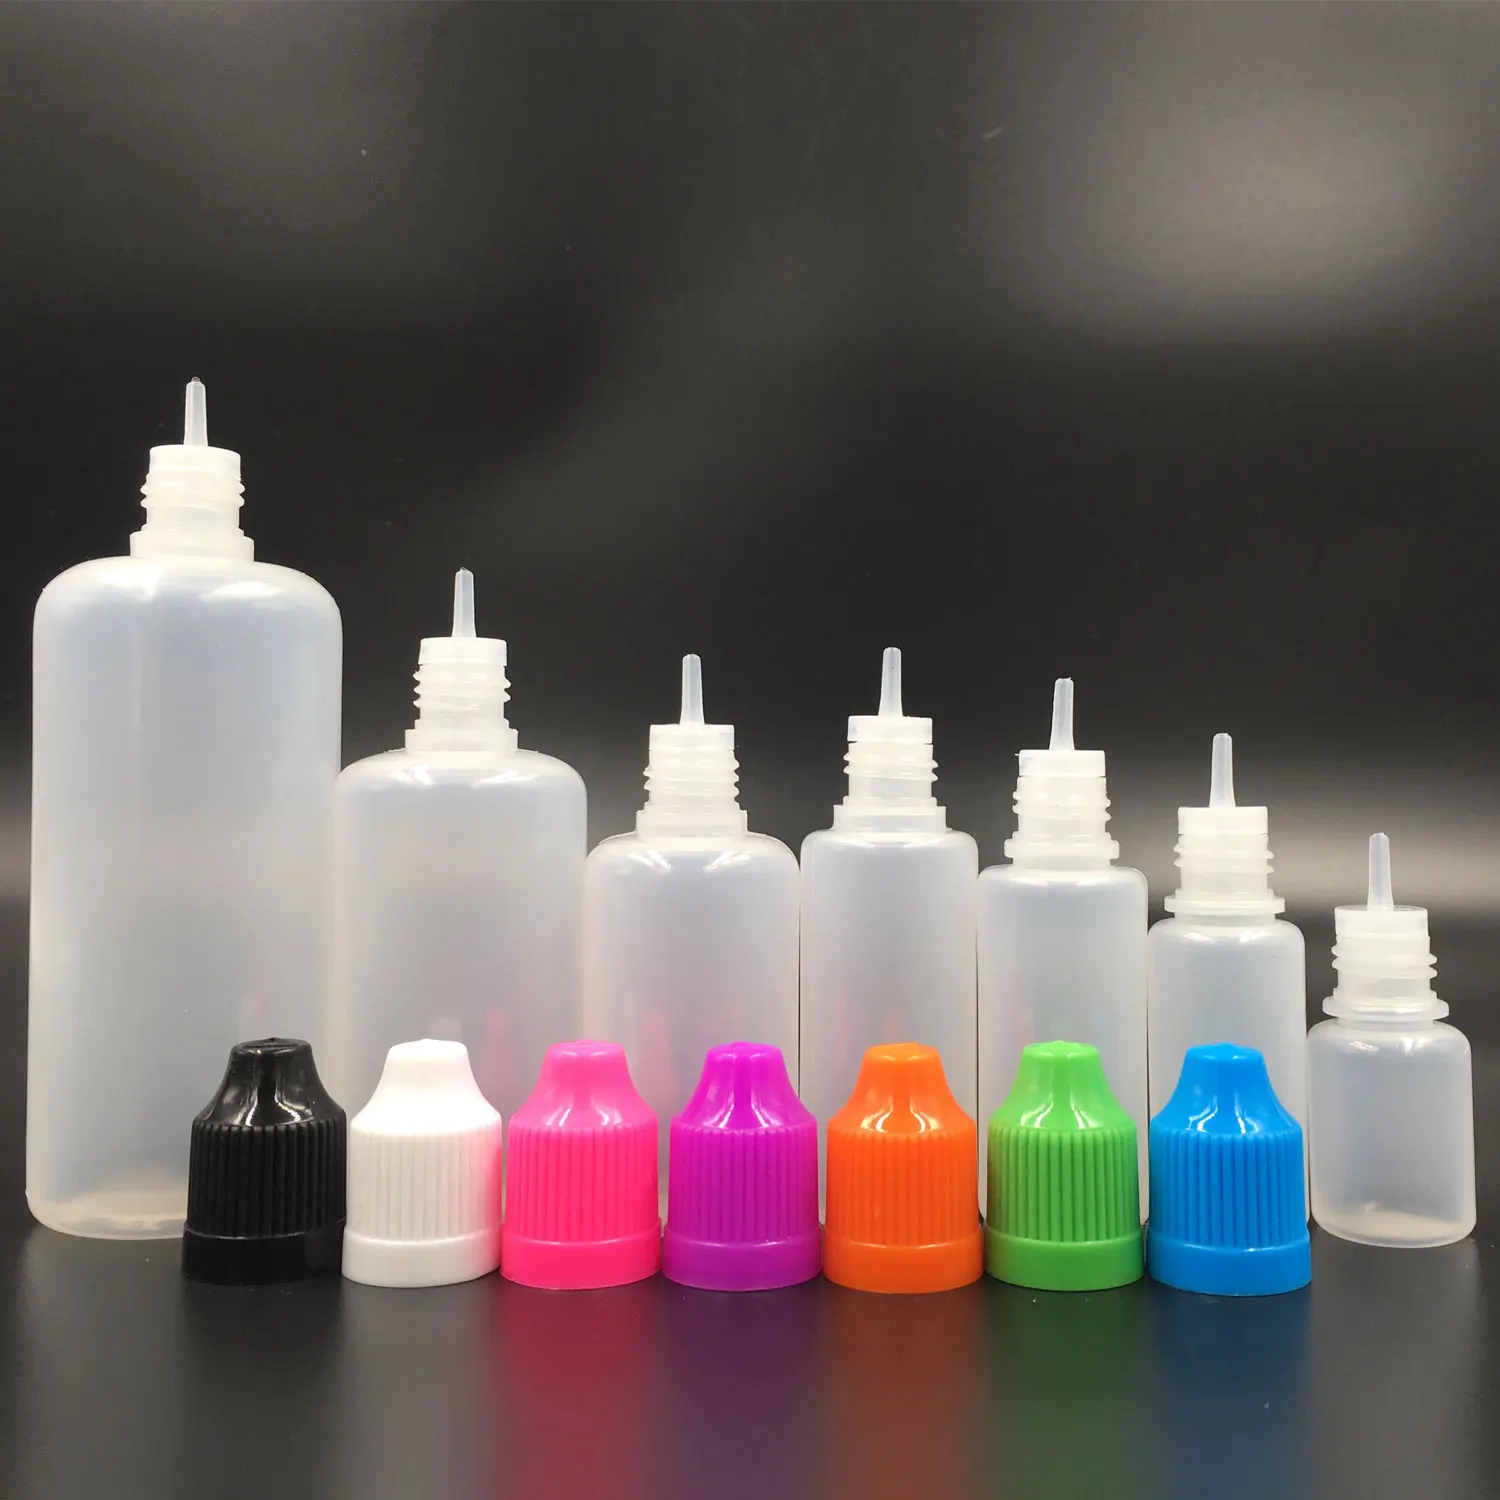 10pcs 5ml-120ml Empty Soft LDPE Dropper Bottles Plastic Containers for E Liquid Vape Bottle with Mixed Caps Lid Plugs 12pcs mixed color rectangle cardboard jewelry gift set box necklace bracelet box with sponge inside packaging storage organizer